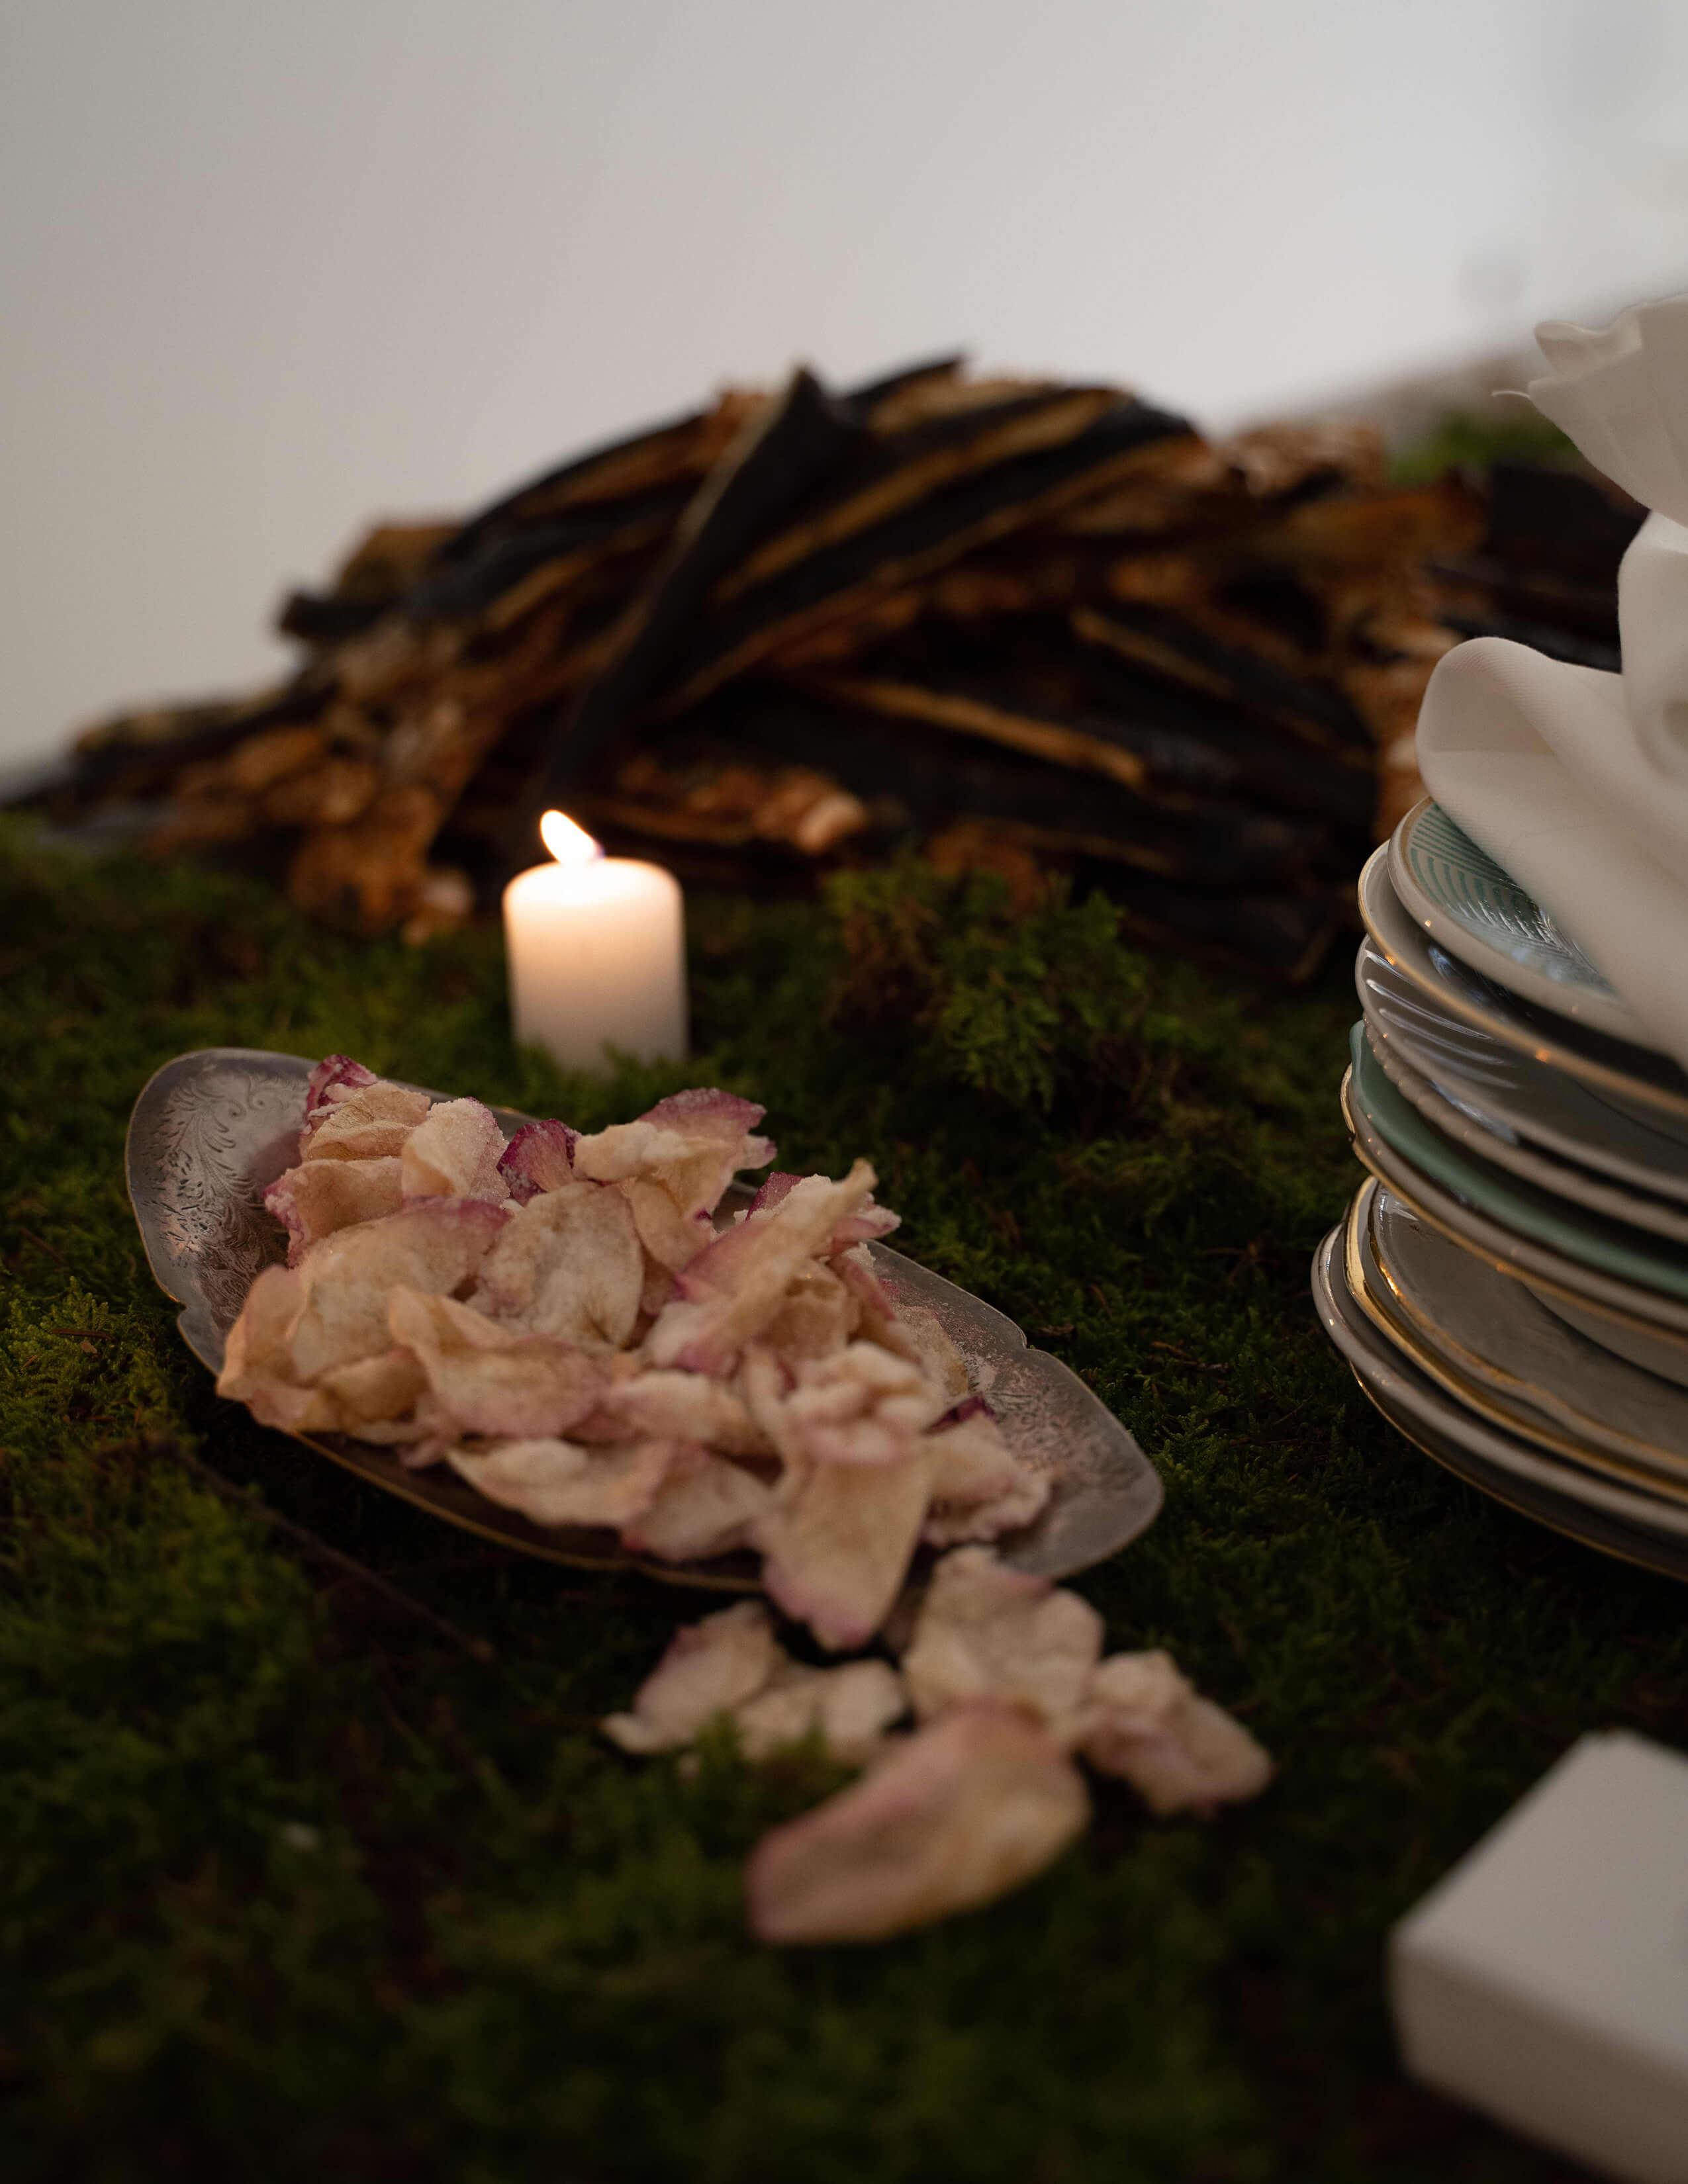 A plate of something that looks like crispy pedals next to a candle and a pile of ceramic plates on the moss's surface.